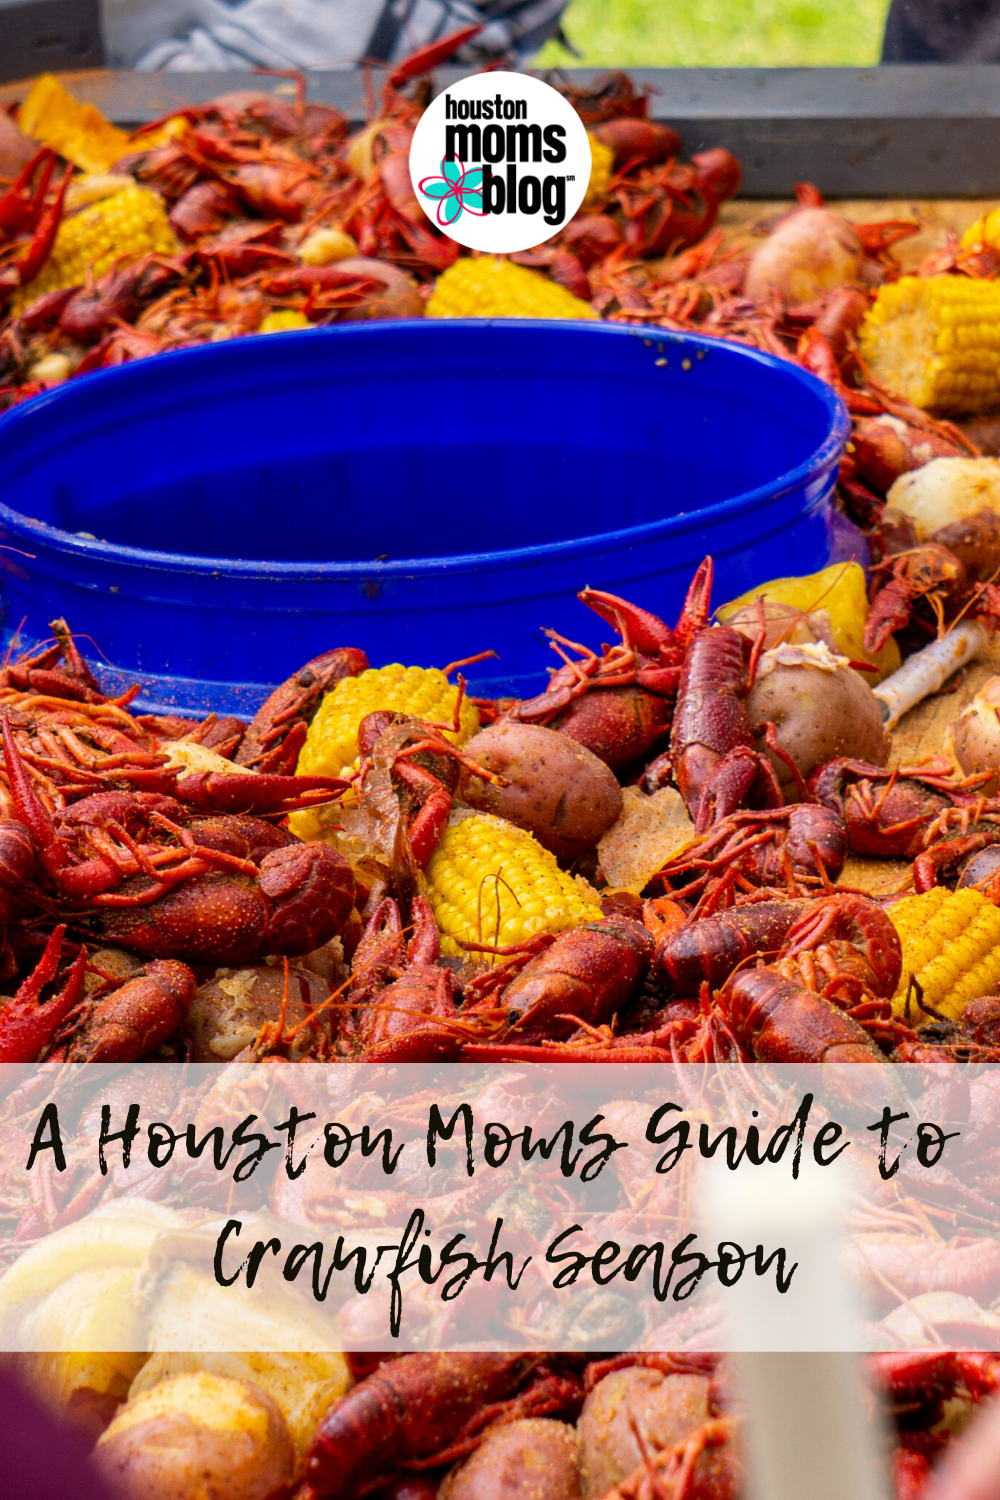 Houston Moms Blog "The Best Crawfish Places In Houston" #houstonmomsblog #momsaroundhouston